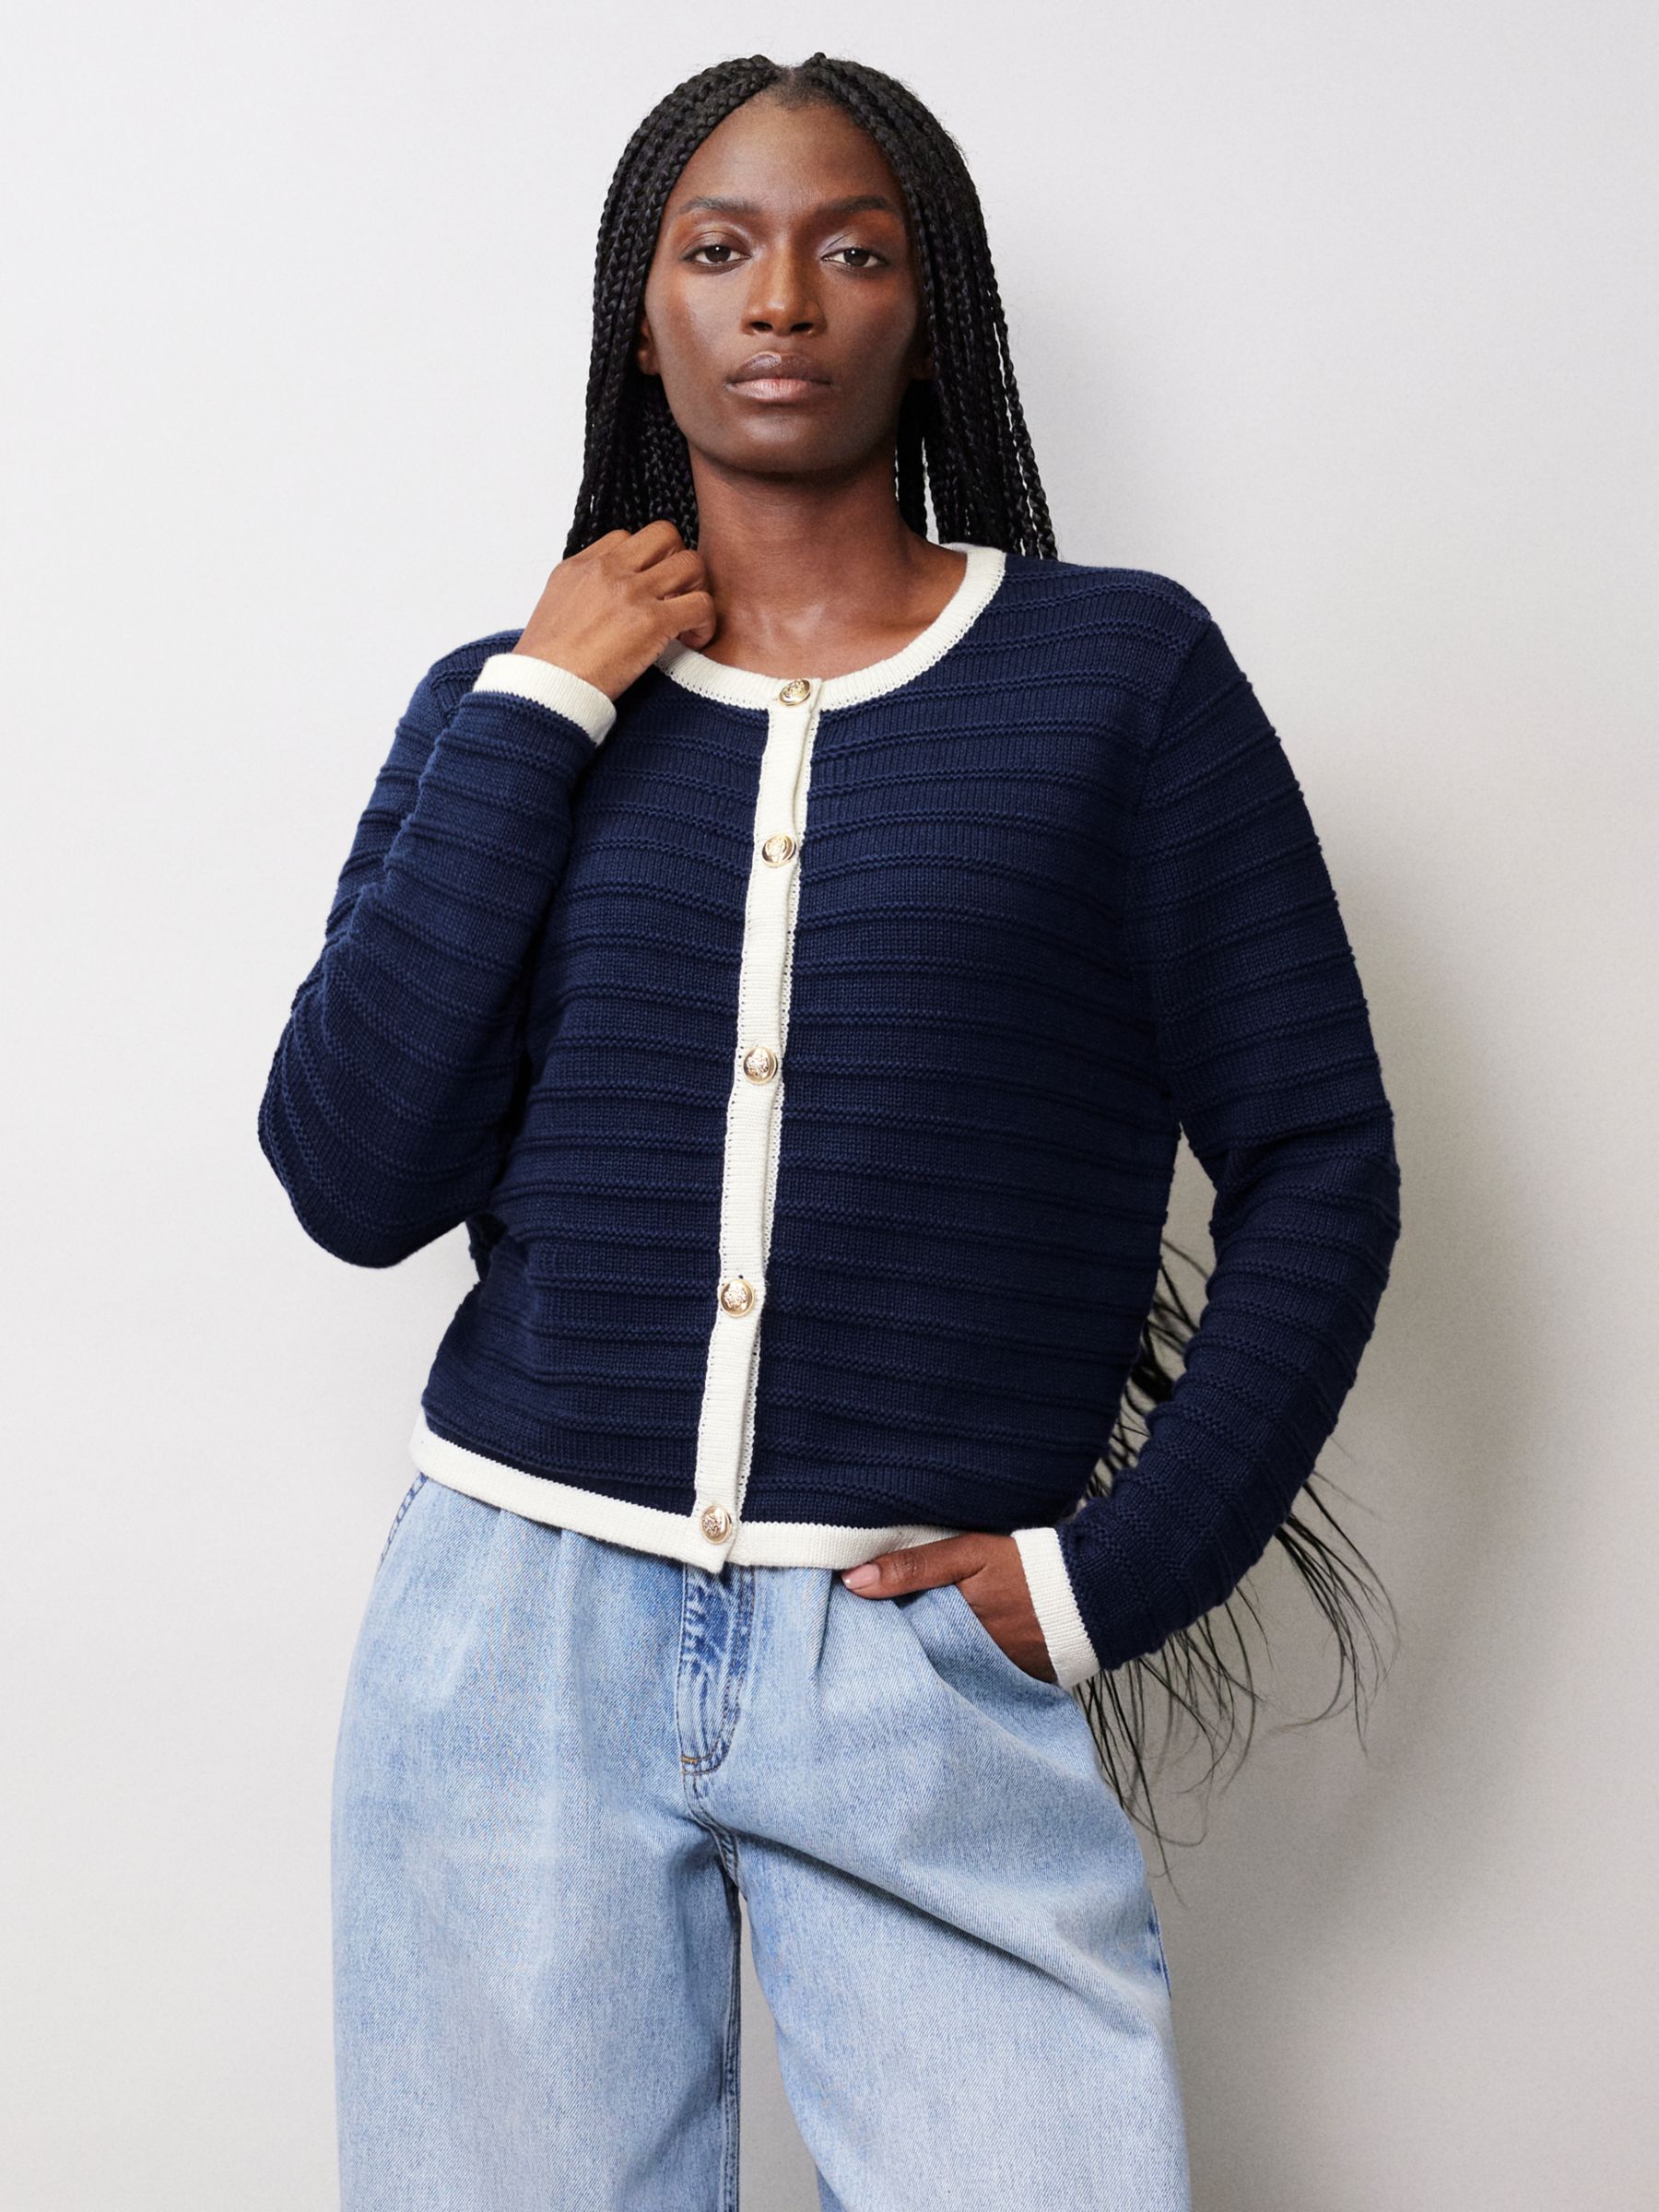 Albaray Knitted Contrast Trim Cardigan/Jacket, Navy at John Lewis ...